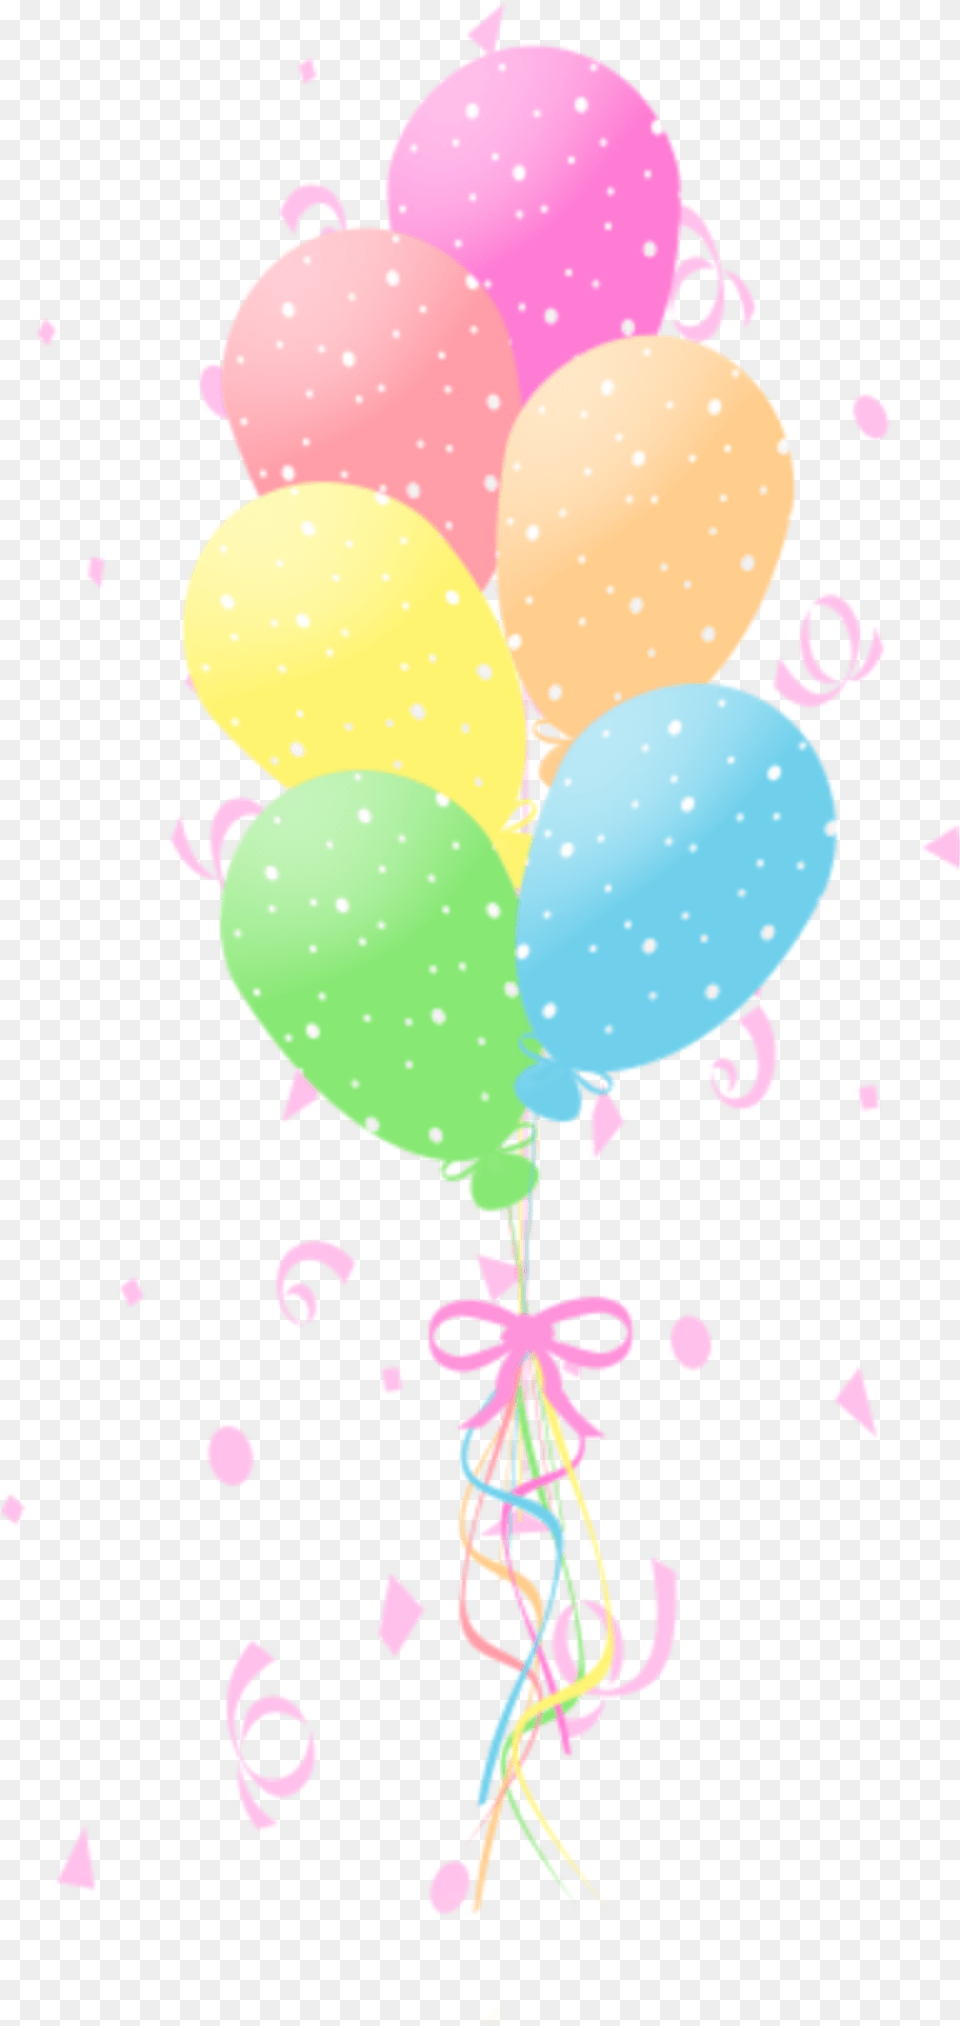 Ftestickers Confetti Balloons Colorful Pastelcolors Balloon, Paper Png Image